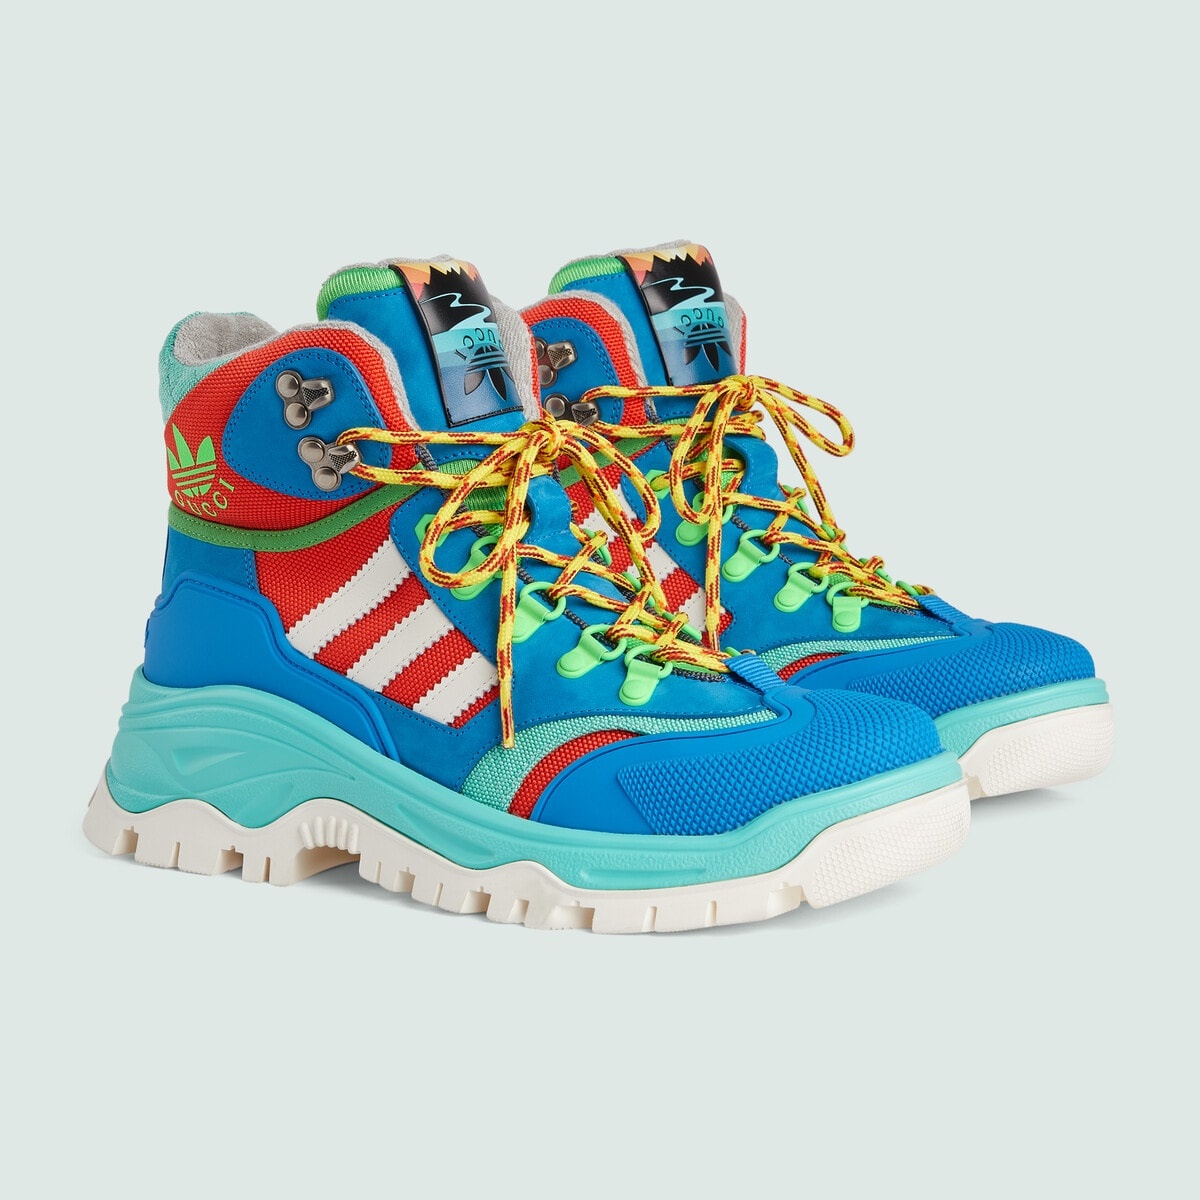 adidas x Gucci women's lace up boot - 2